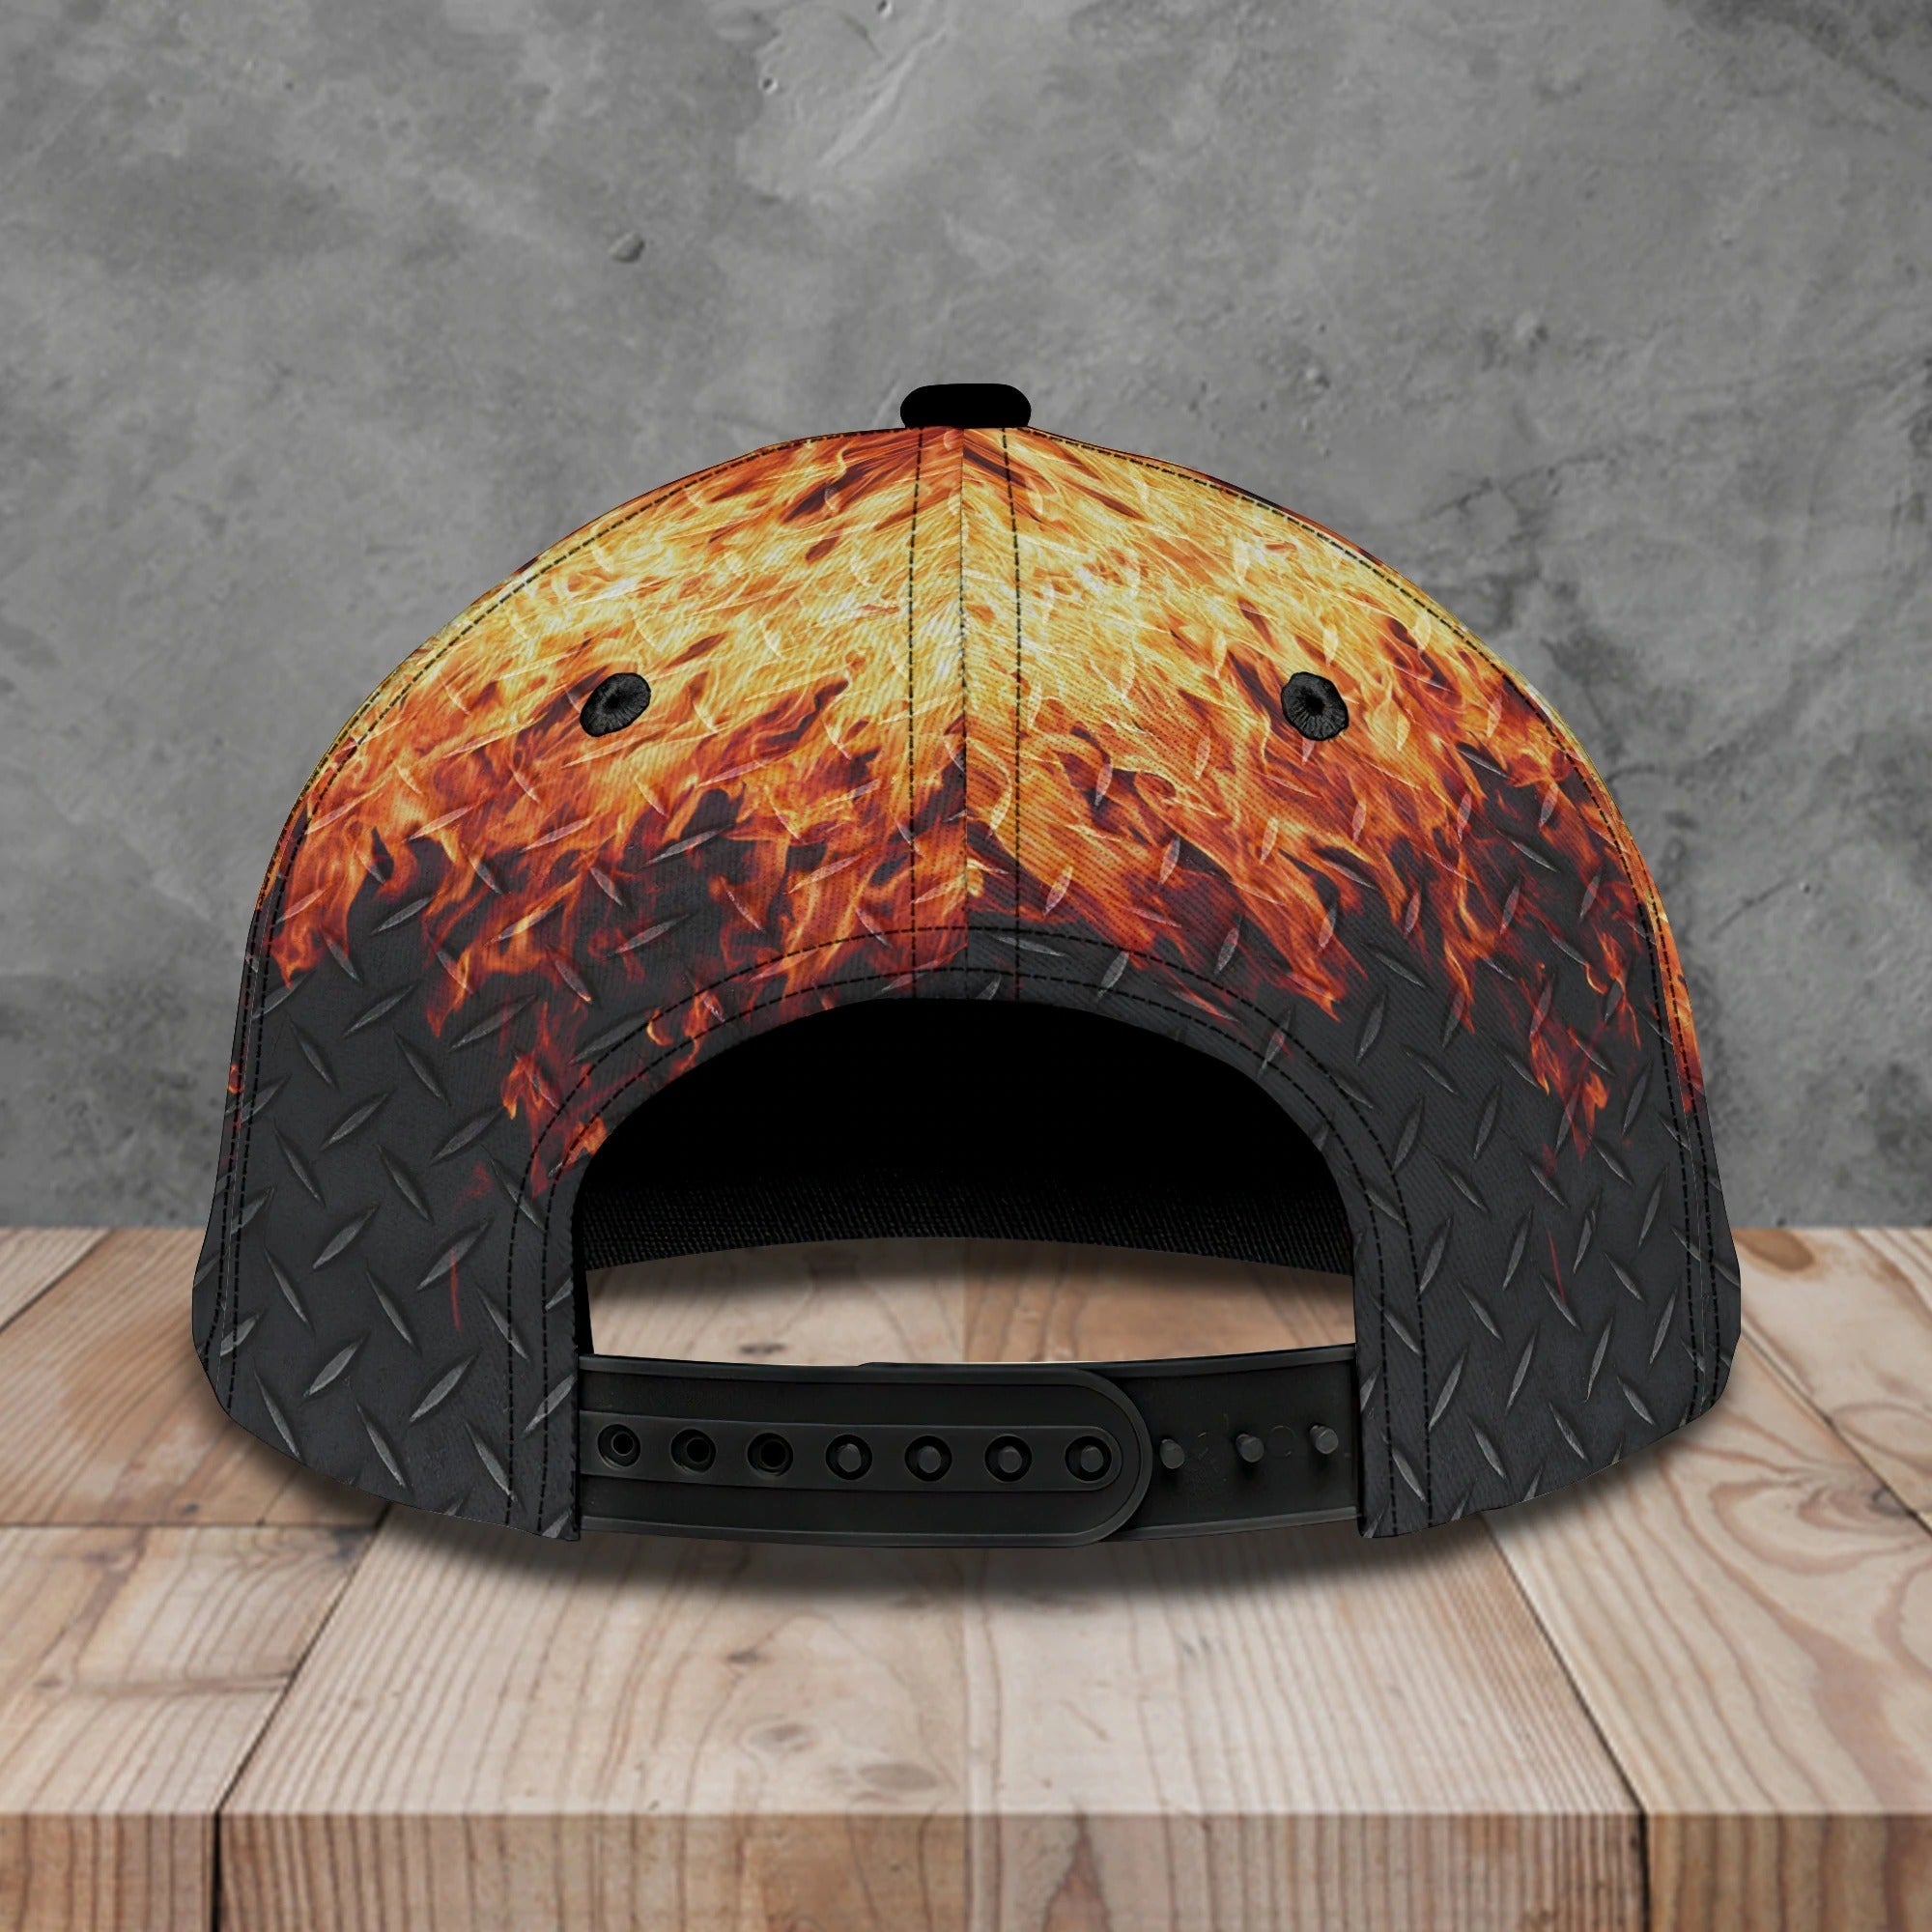 Custom With Name Fire Man Baseball Cap/ Classic 3D Full Print Hat Cap For Firefighters